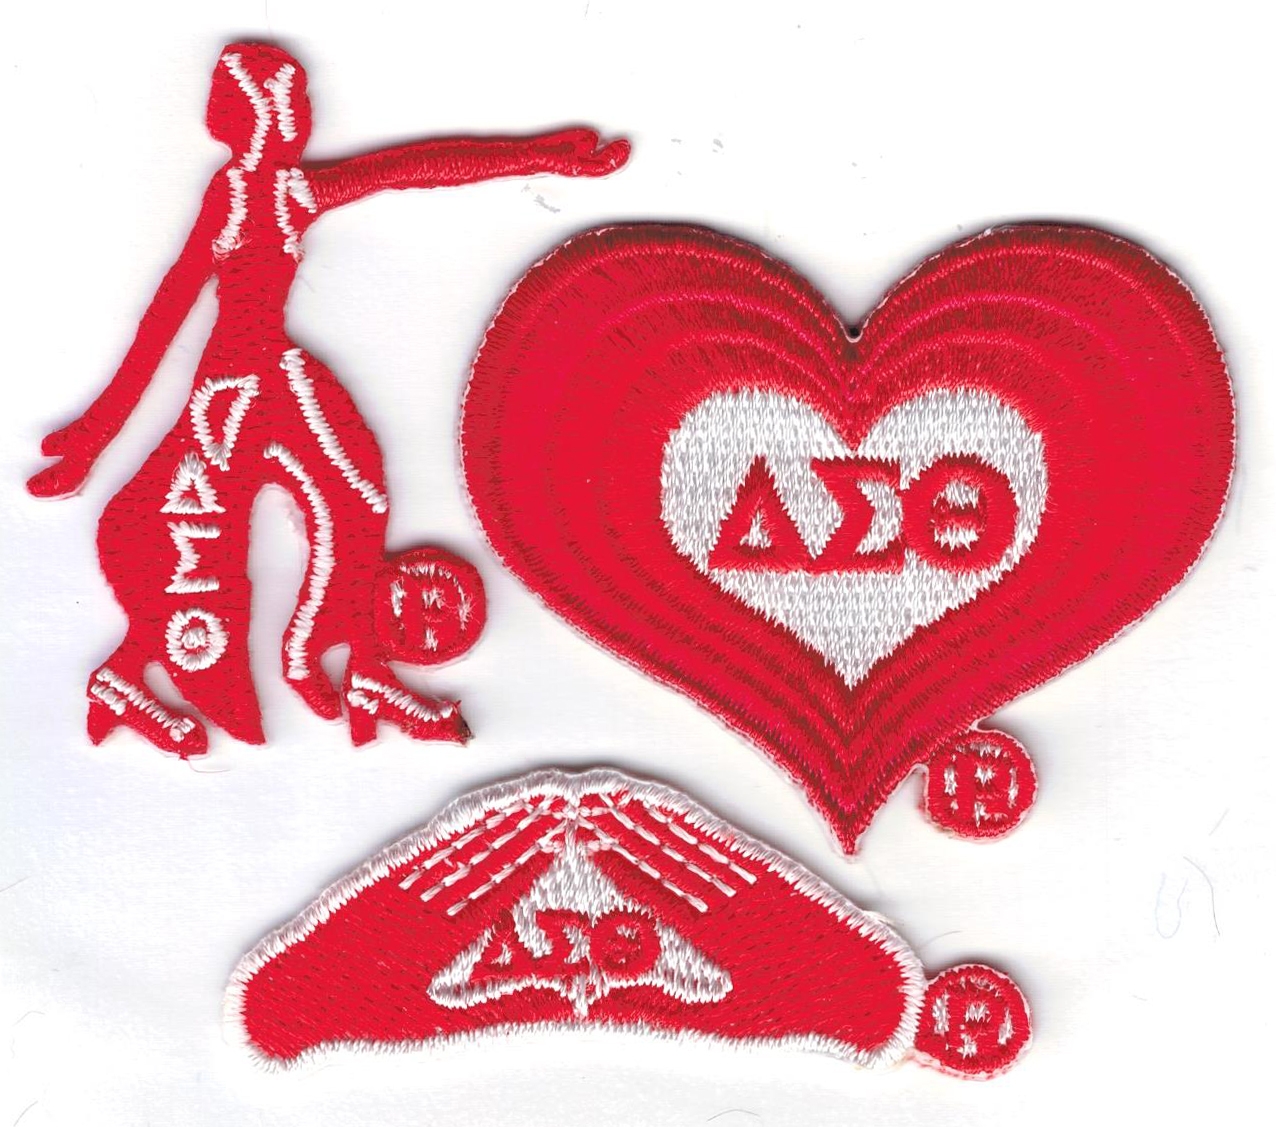 Delta Sigma Theta Pack B Embroidered Stick On Applique Patches Red Product Details